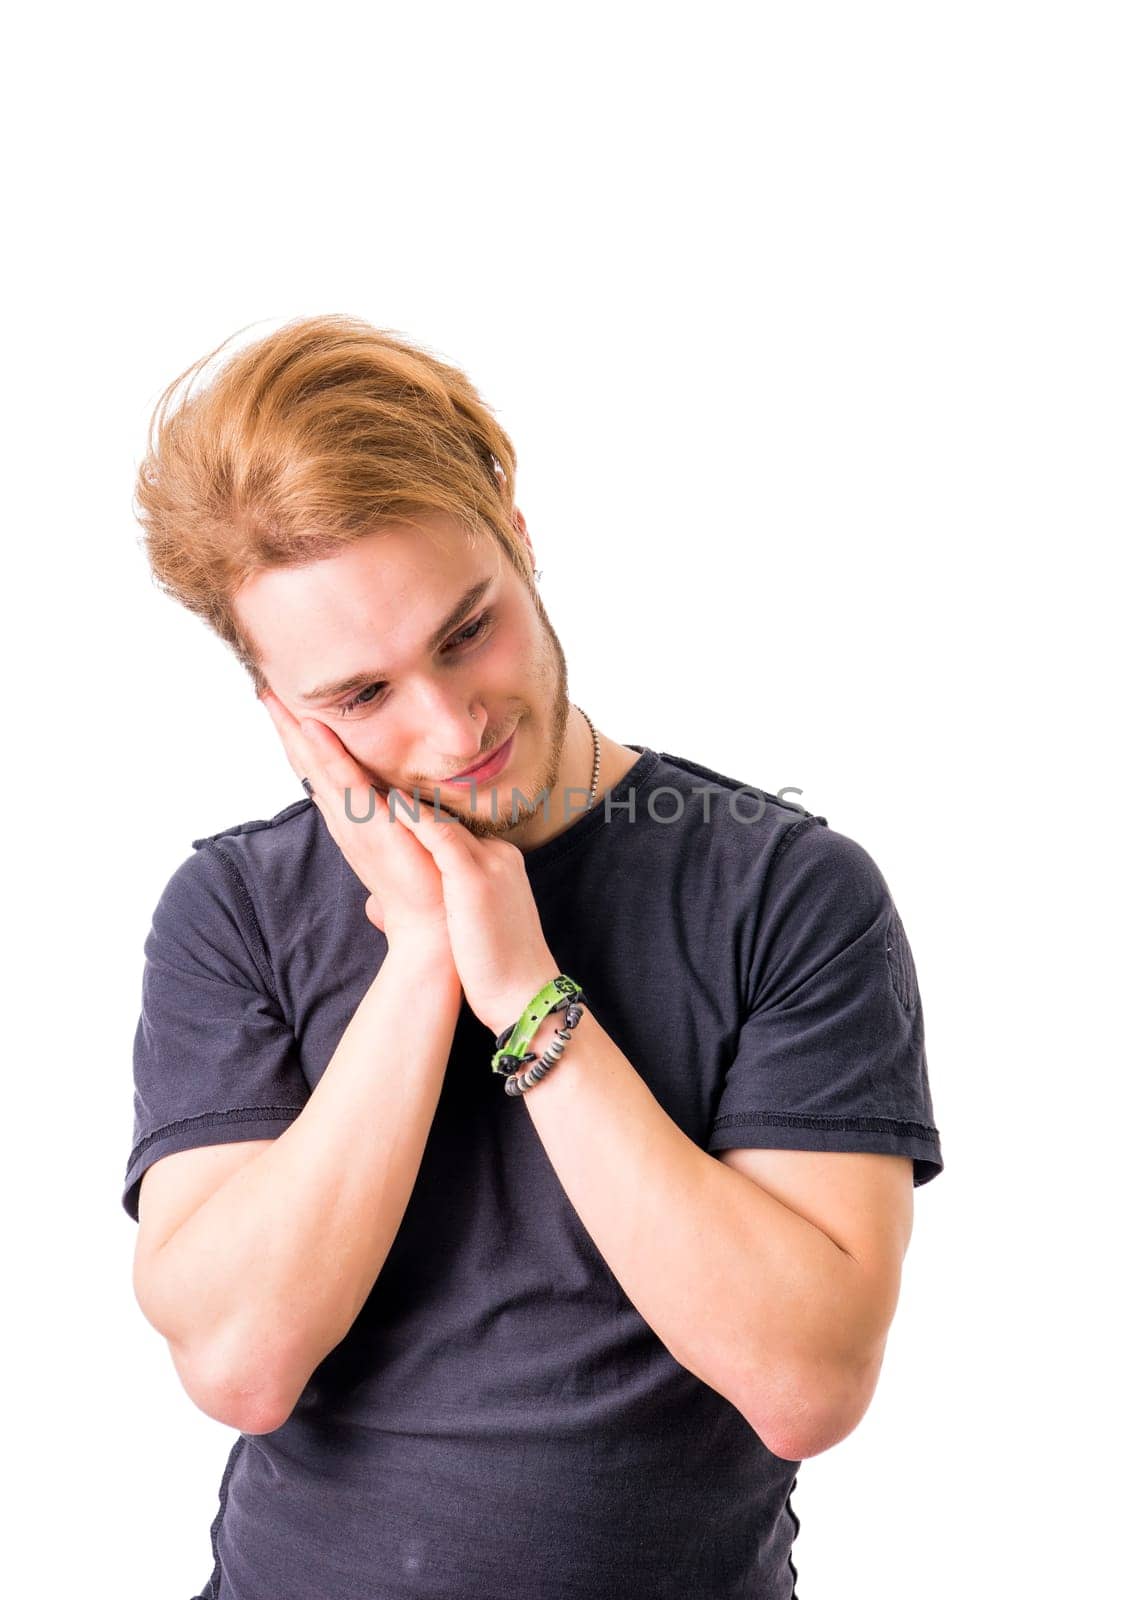 A young blond attractive man with a dreaming expression, thinking with a smile on his face